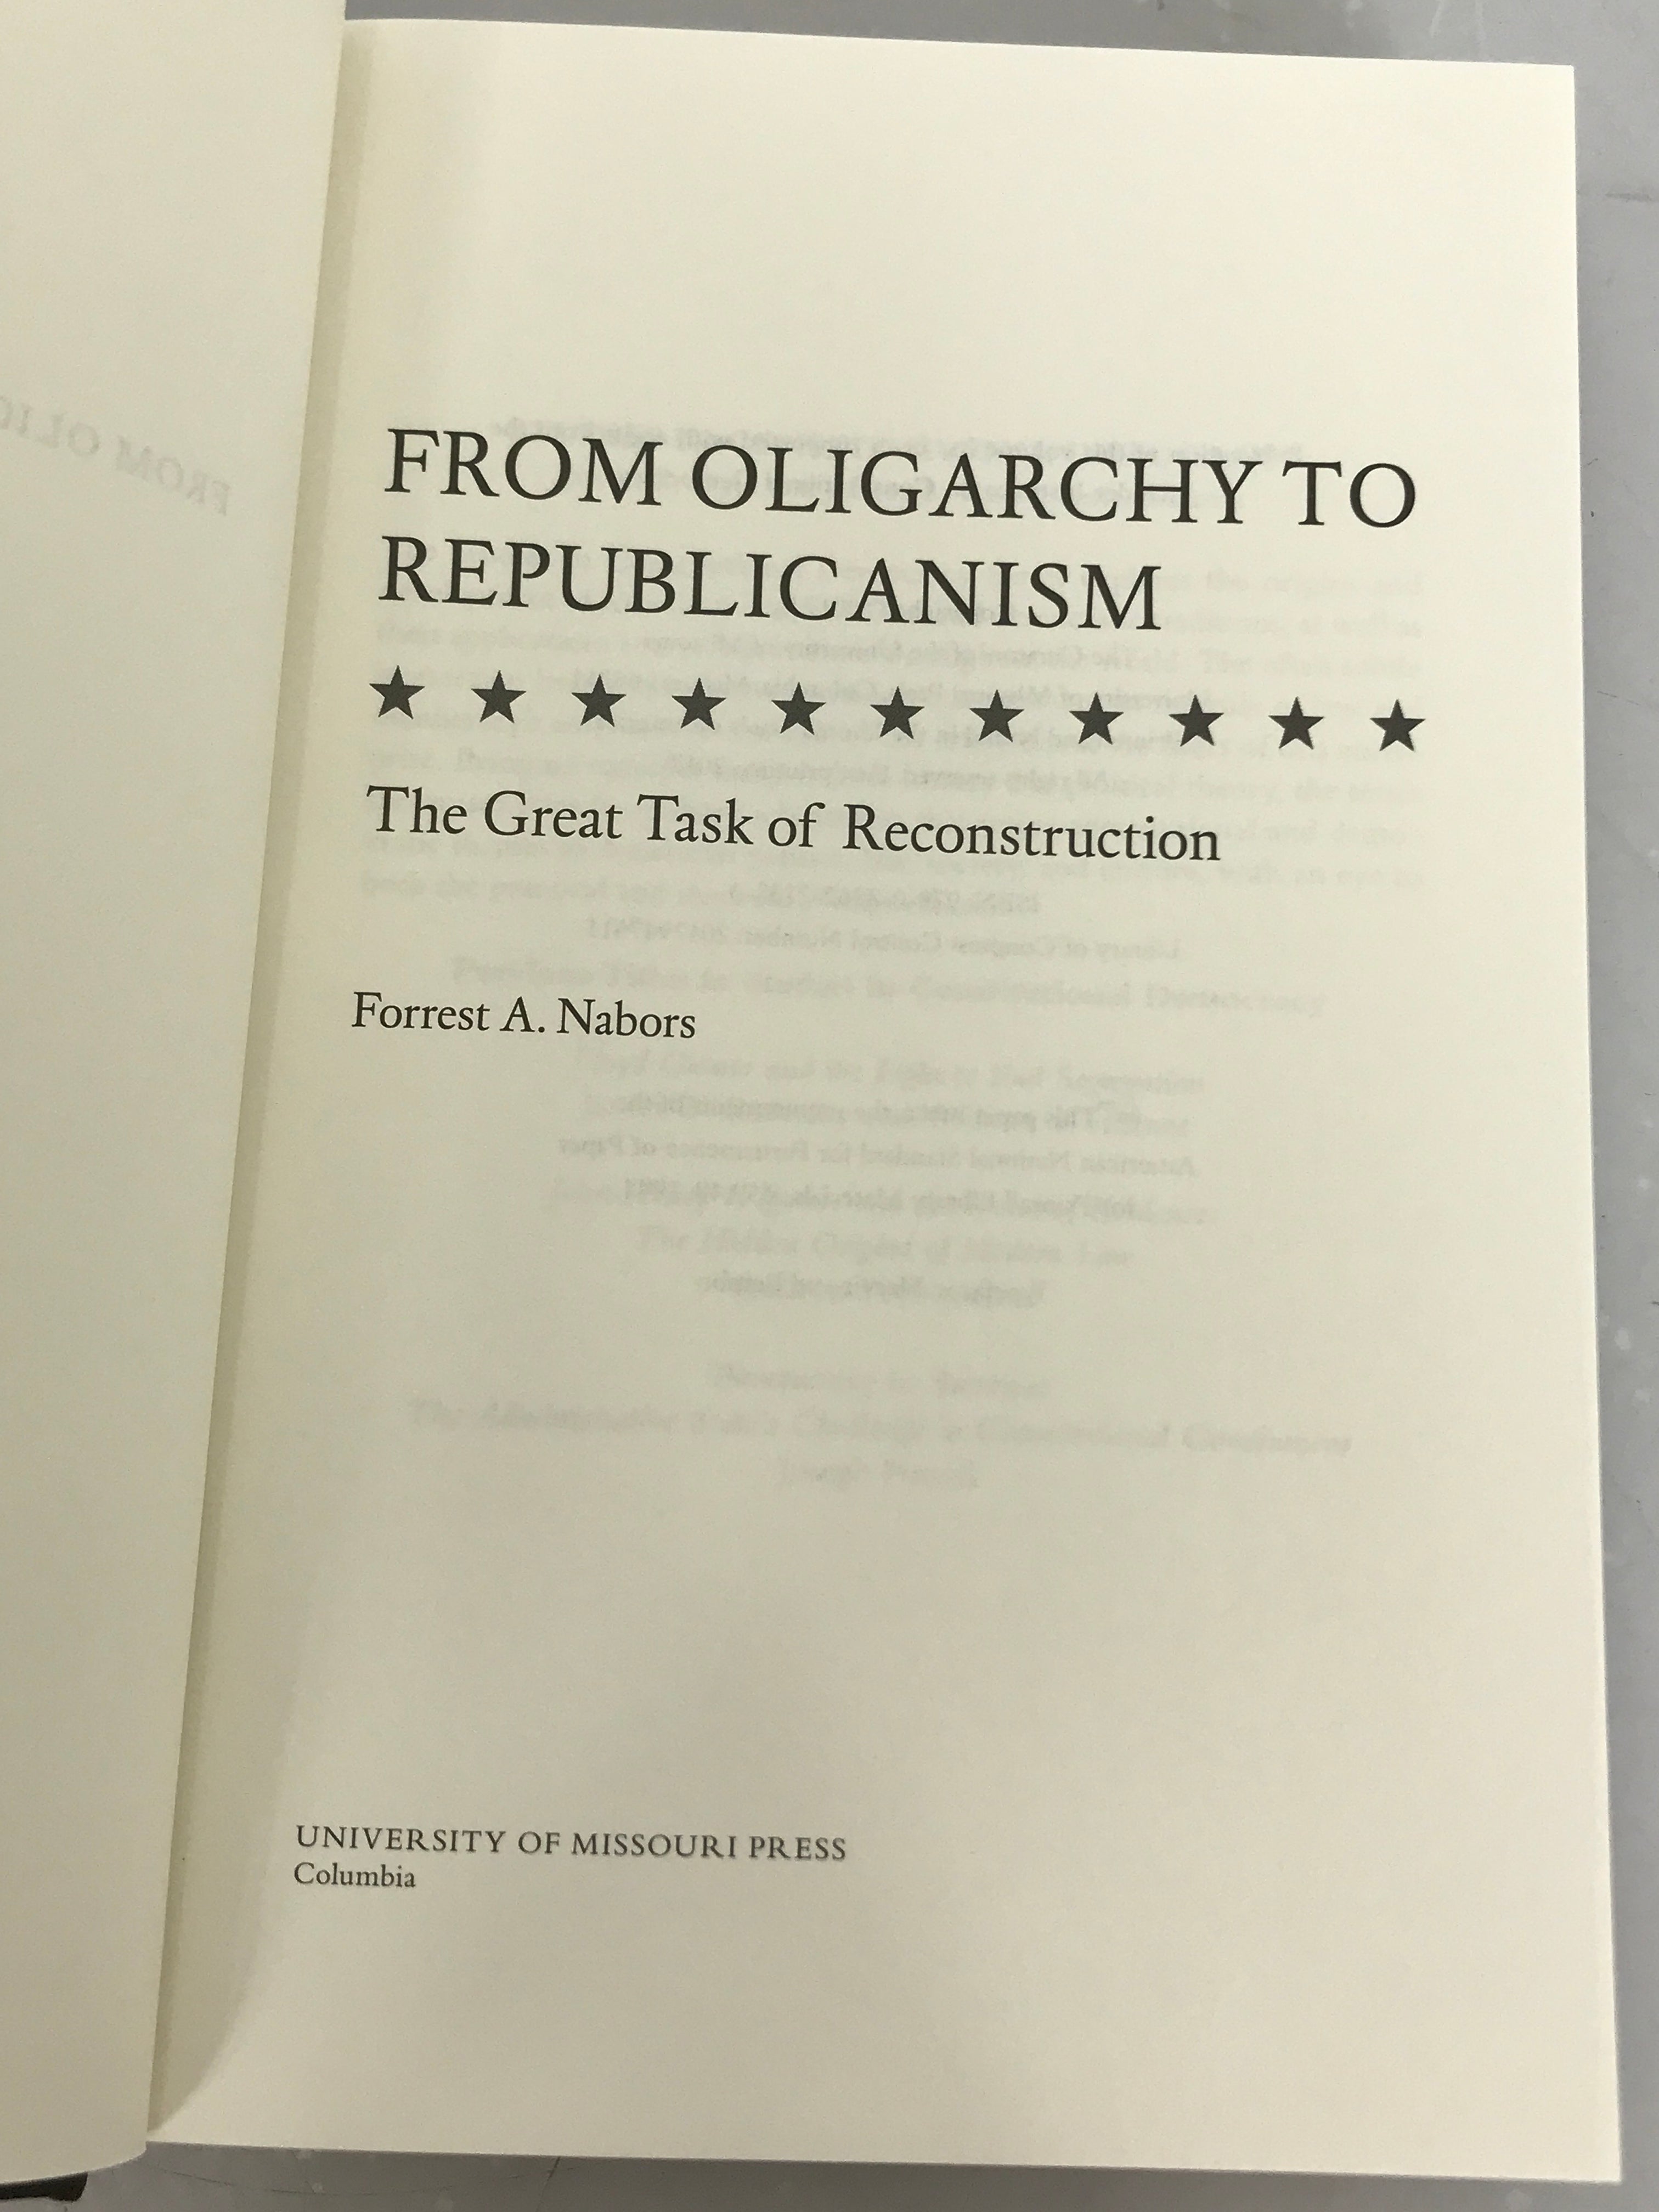 From Oligarchy to Republicanism by Forrest A. Nabors Signed 2017 HC DJ